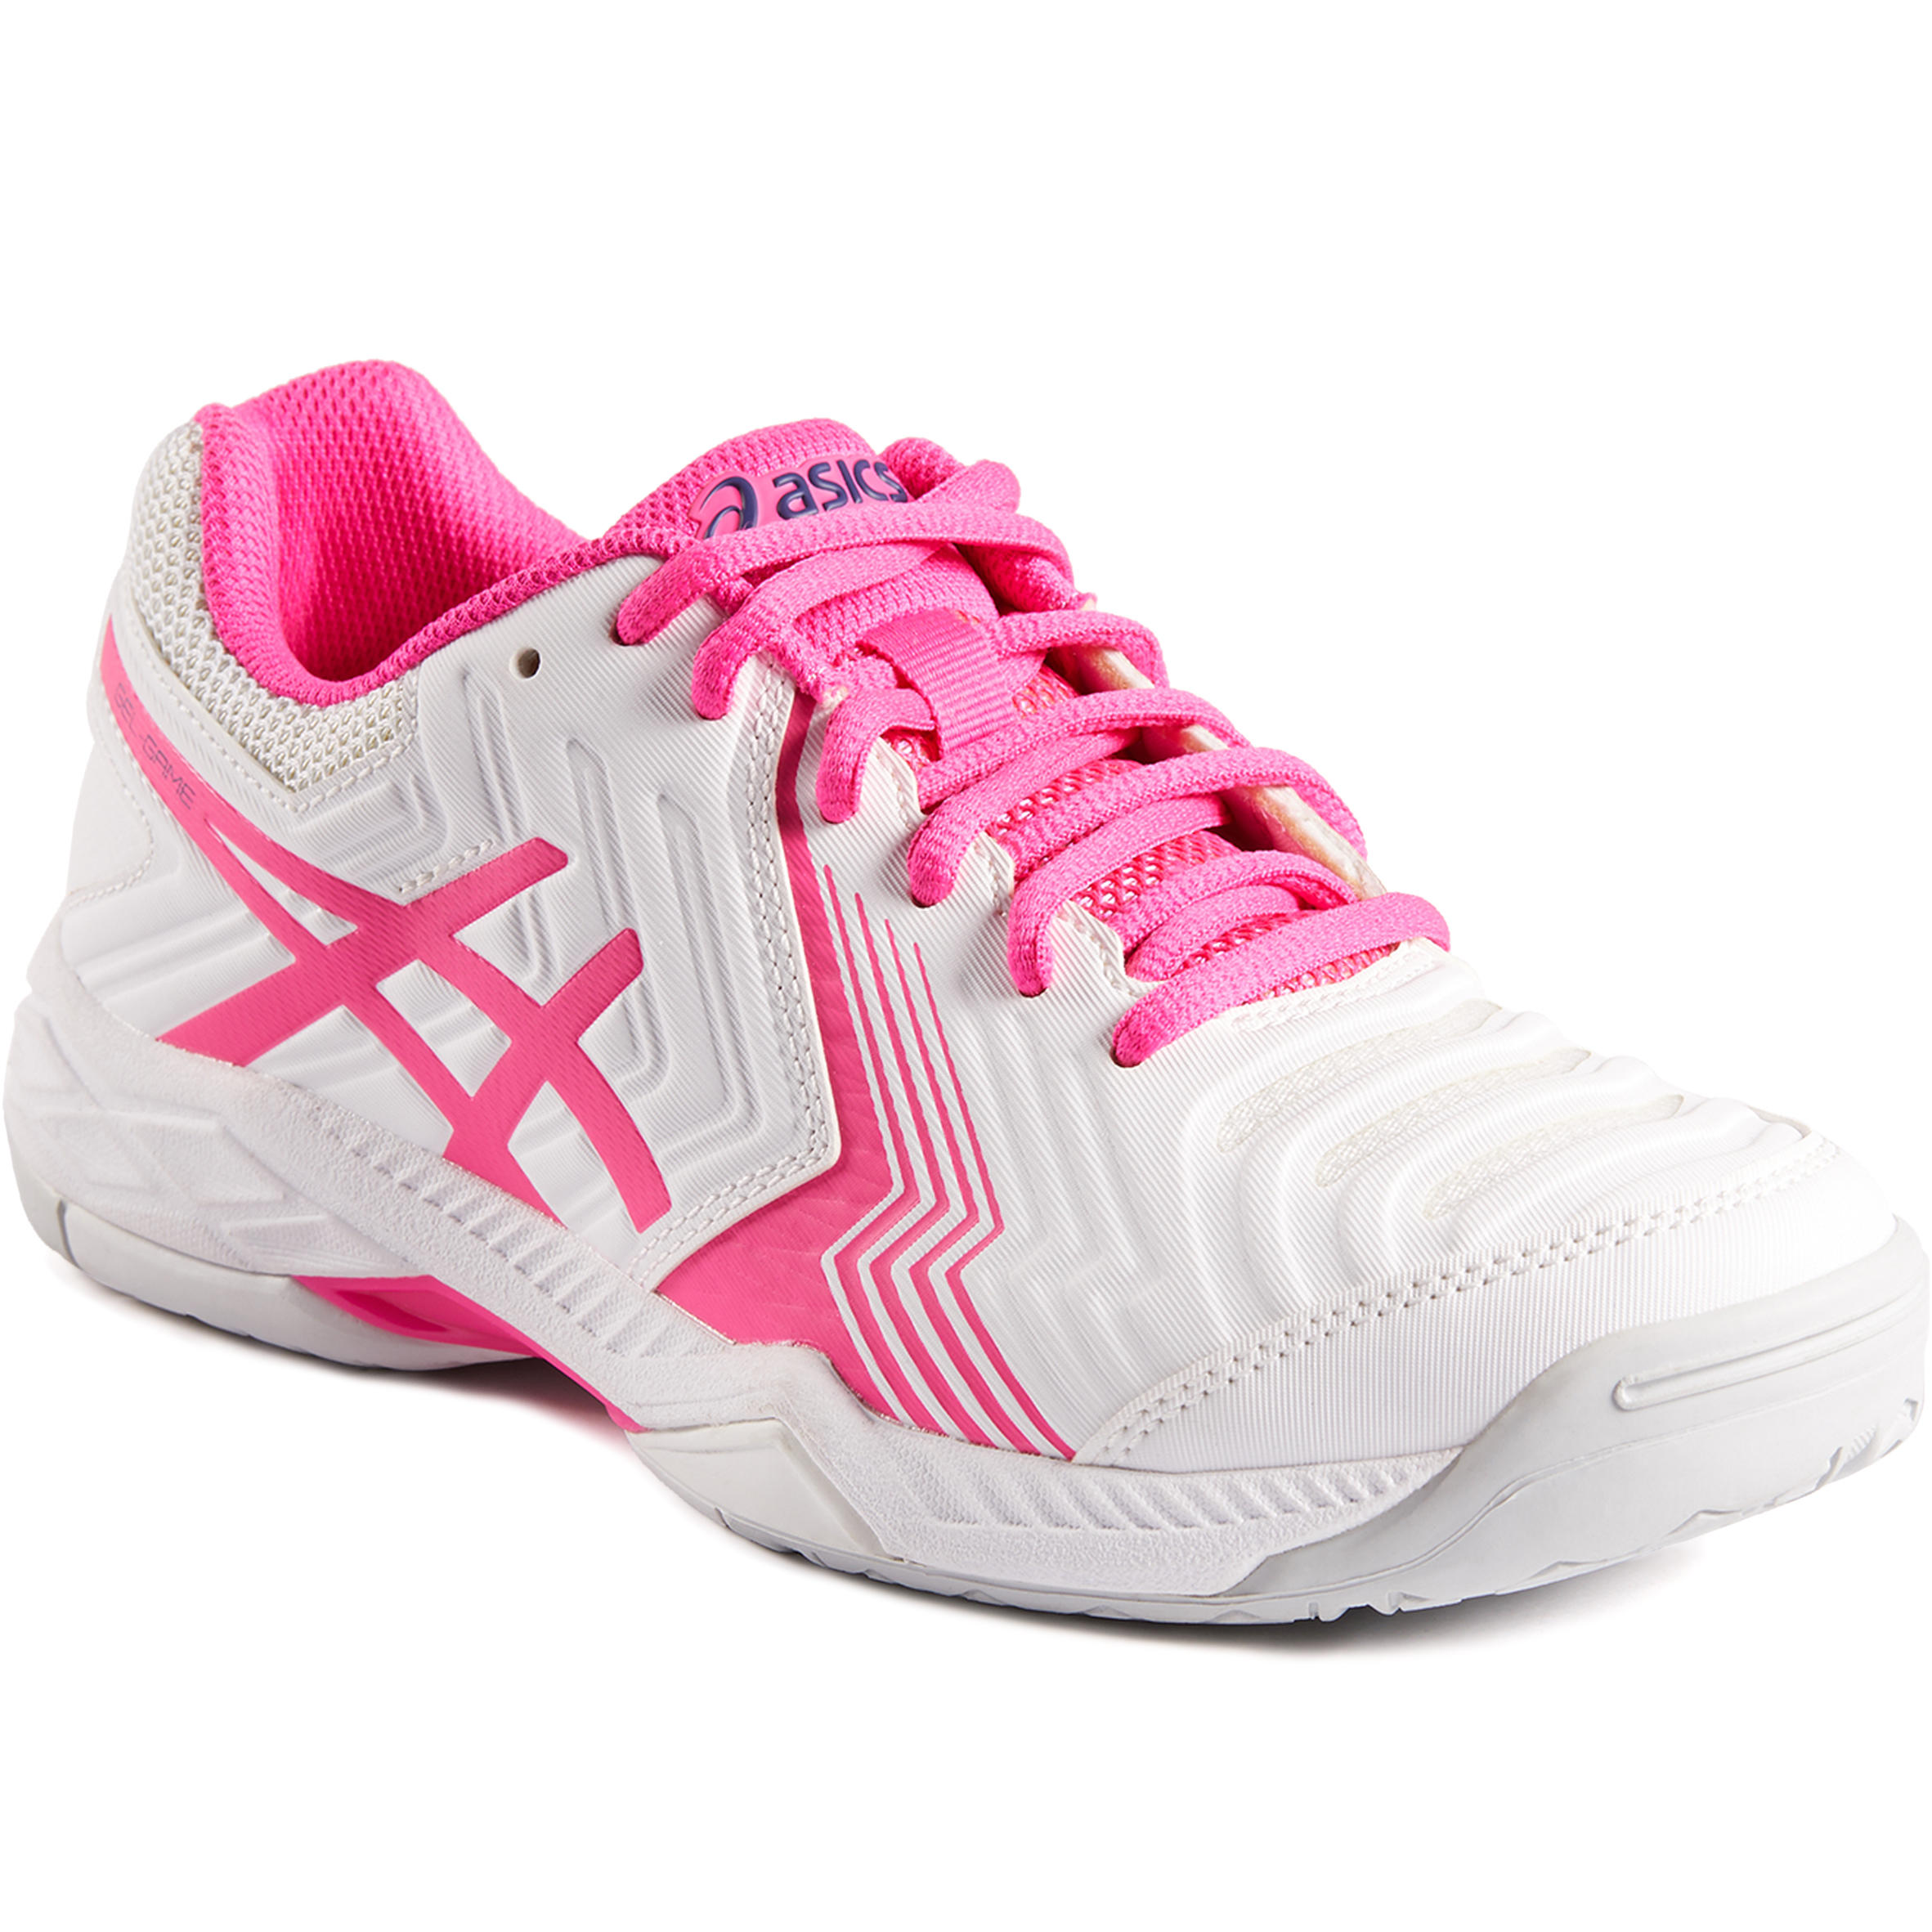 pink and white tennis